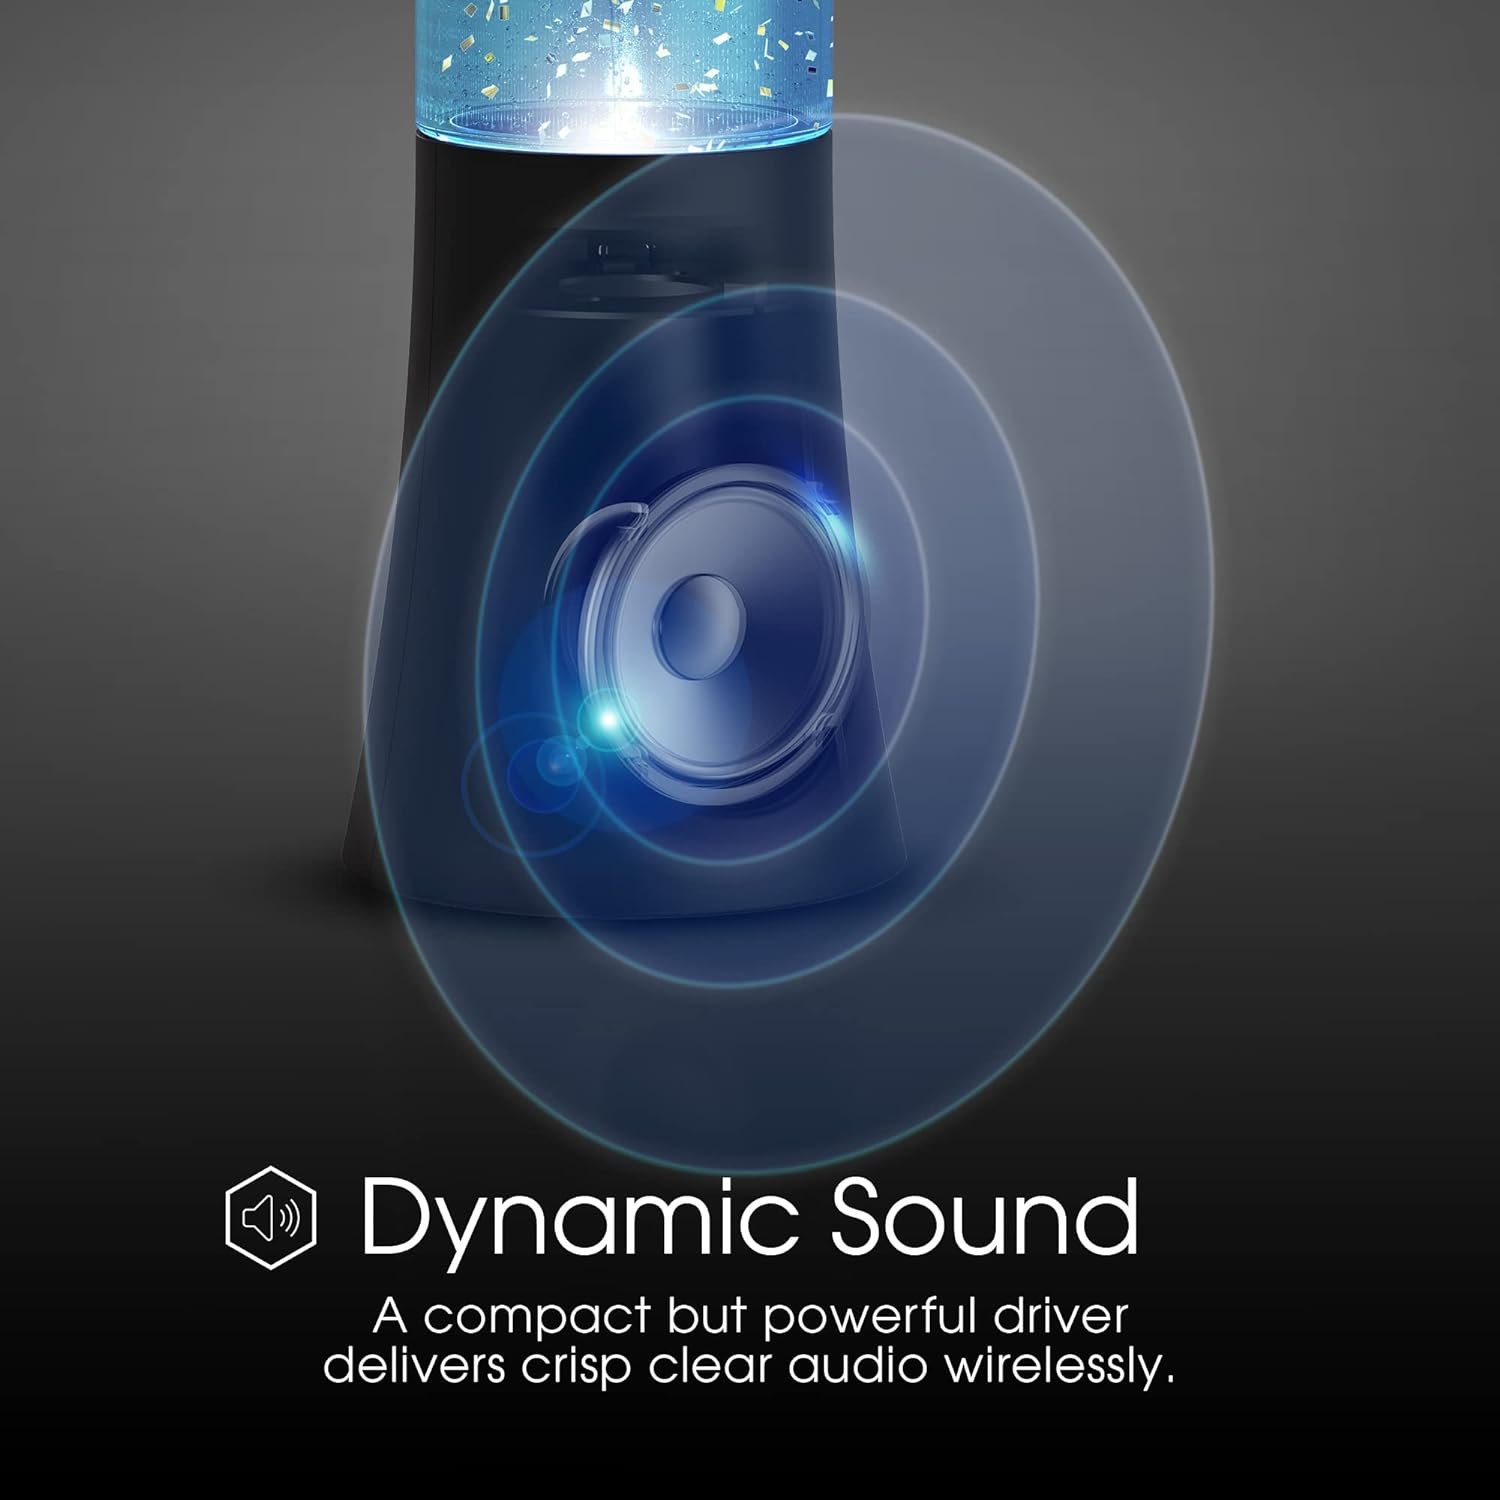 ART+SOUND Vortex Tornado TWS Bluetooth Speaker, 7 LED Light Show, Portable Speaker, Tornado Feature, Connect 2 Speakers at a Time, Bass Boosted, Home and Outdoor Speaker, Rechargeable Speaker